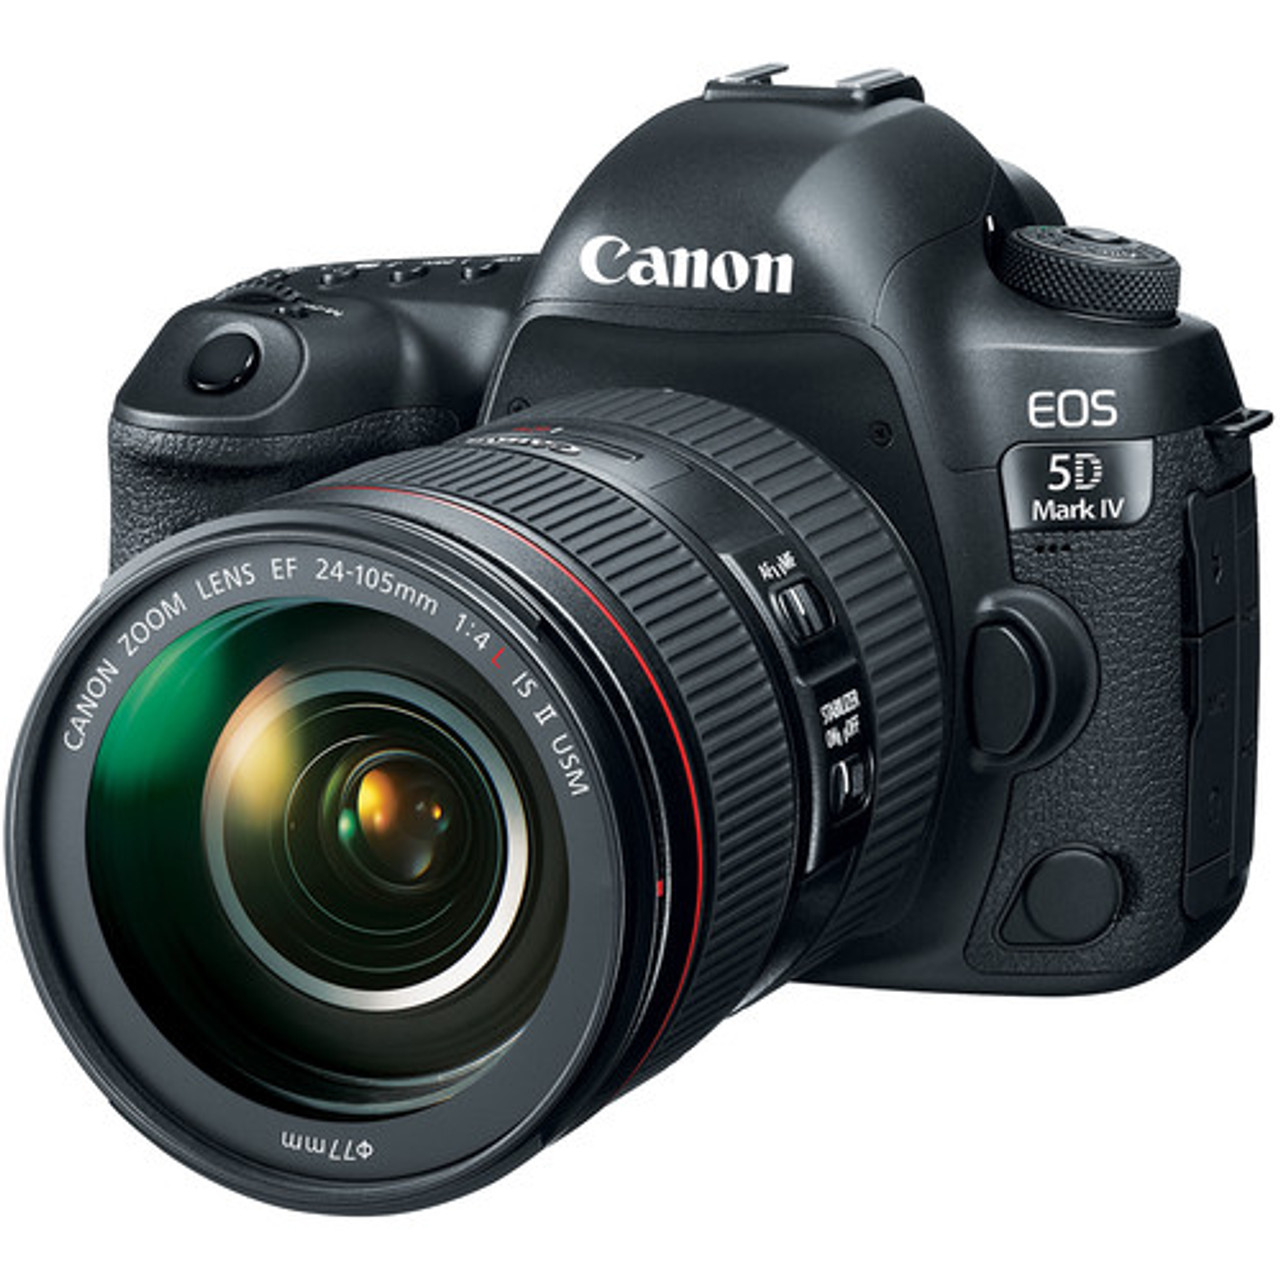 Luipaard Civiel Lichaam Canon EOS 5D Mark IV DSLR Camera with 24-105mm f/4L II Lens - Ace Photo